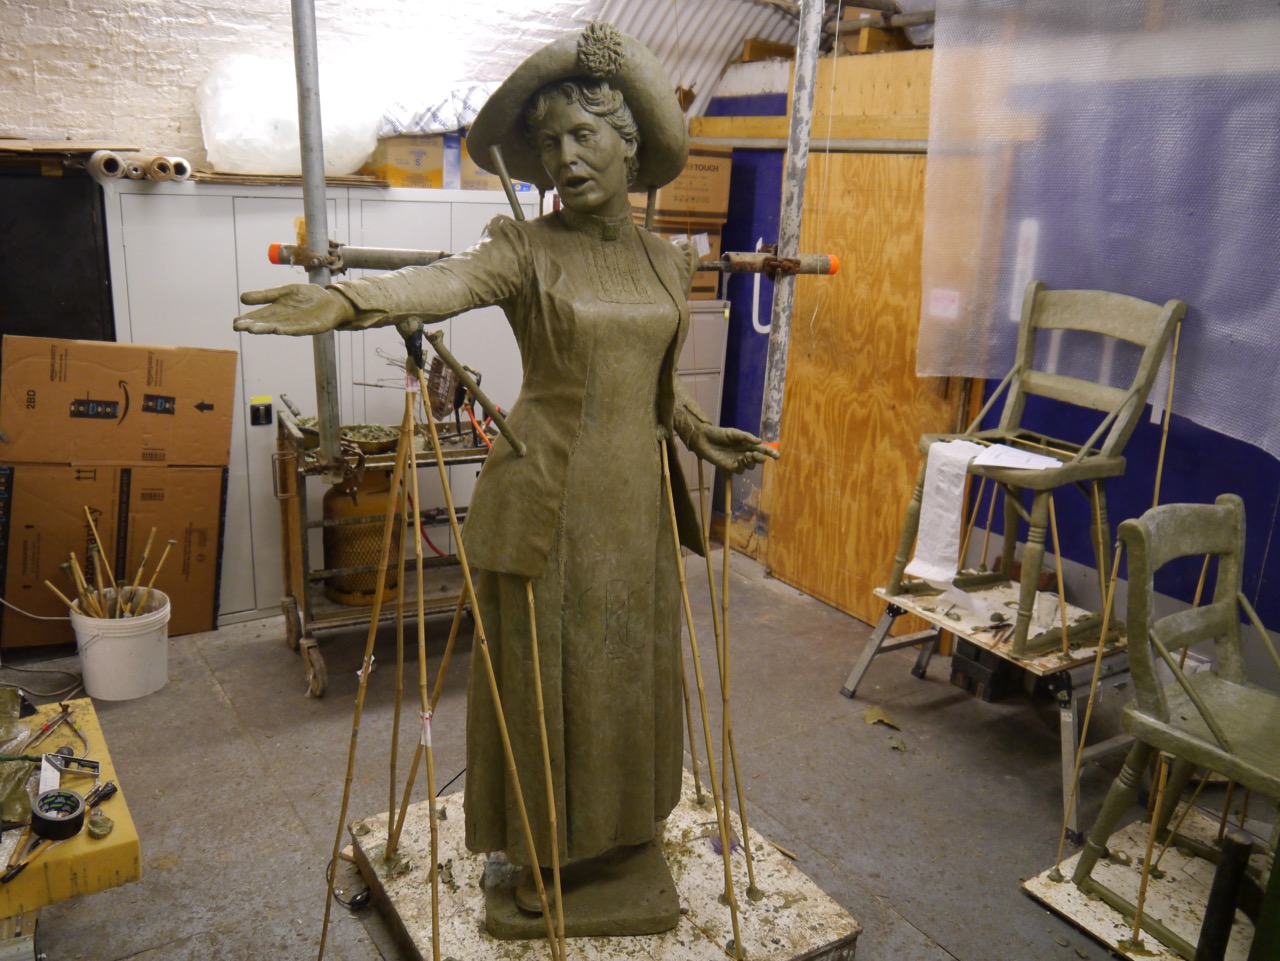 Our Emmeline in wax at Bronze Age foundry - photo by Hazel Reeves